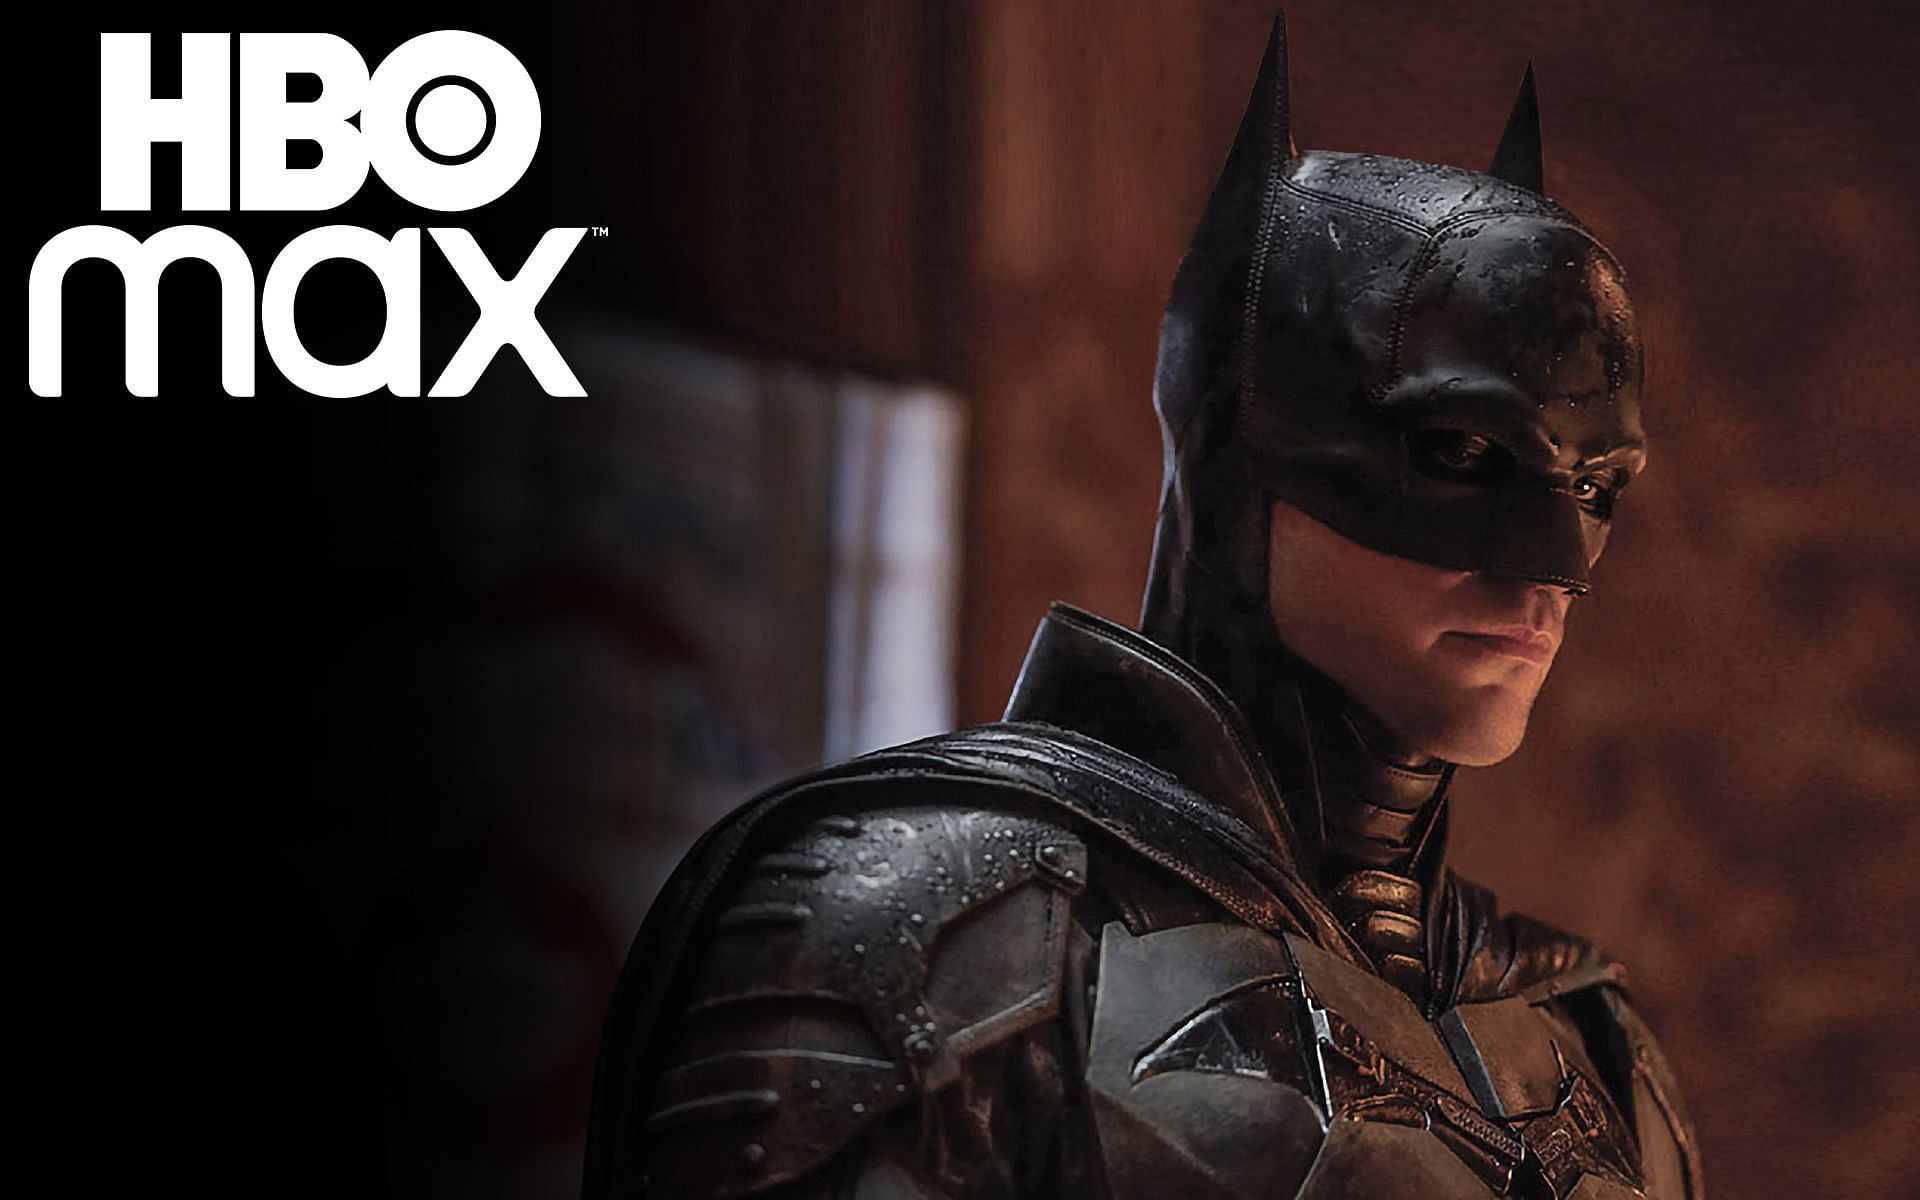 The Batman is expected to arrive on HBO Max on April 19 (Image via HBO Max)